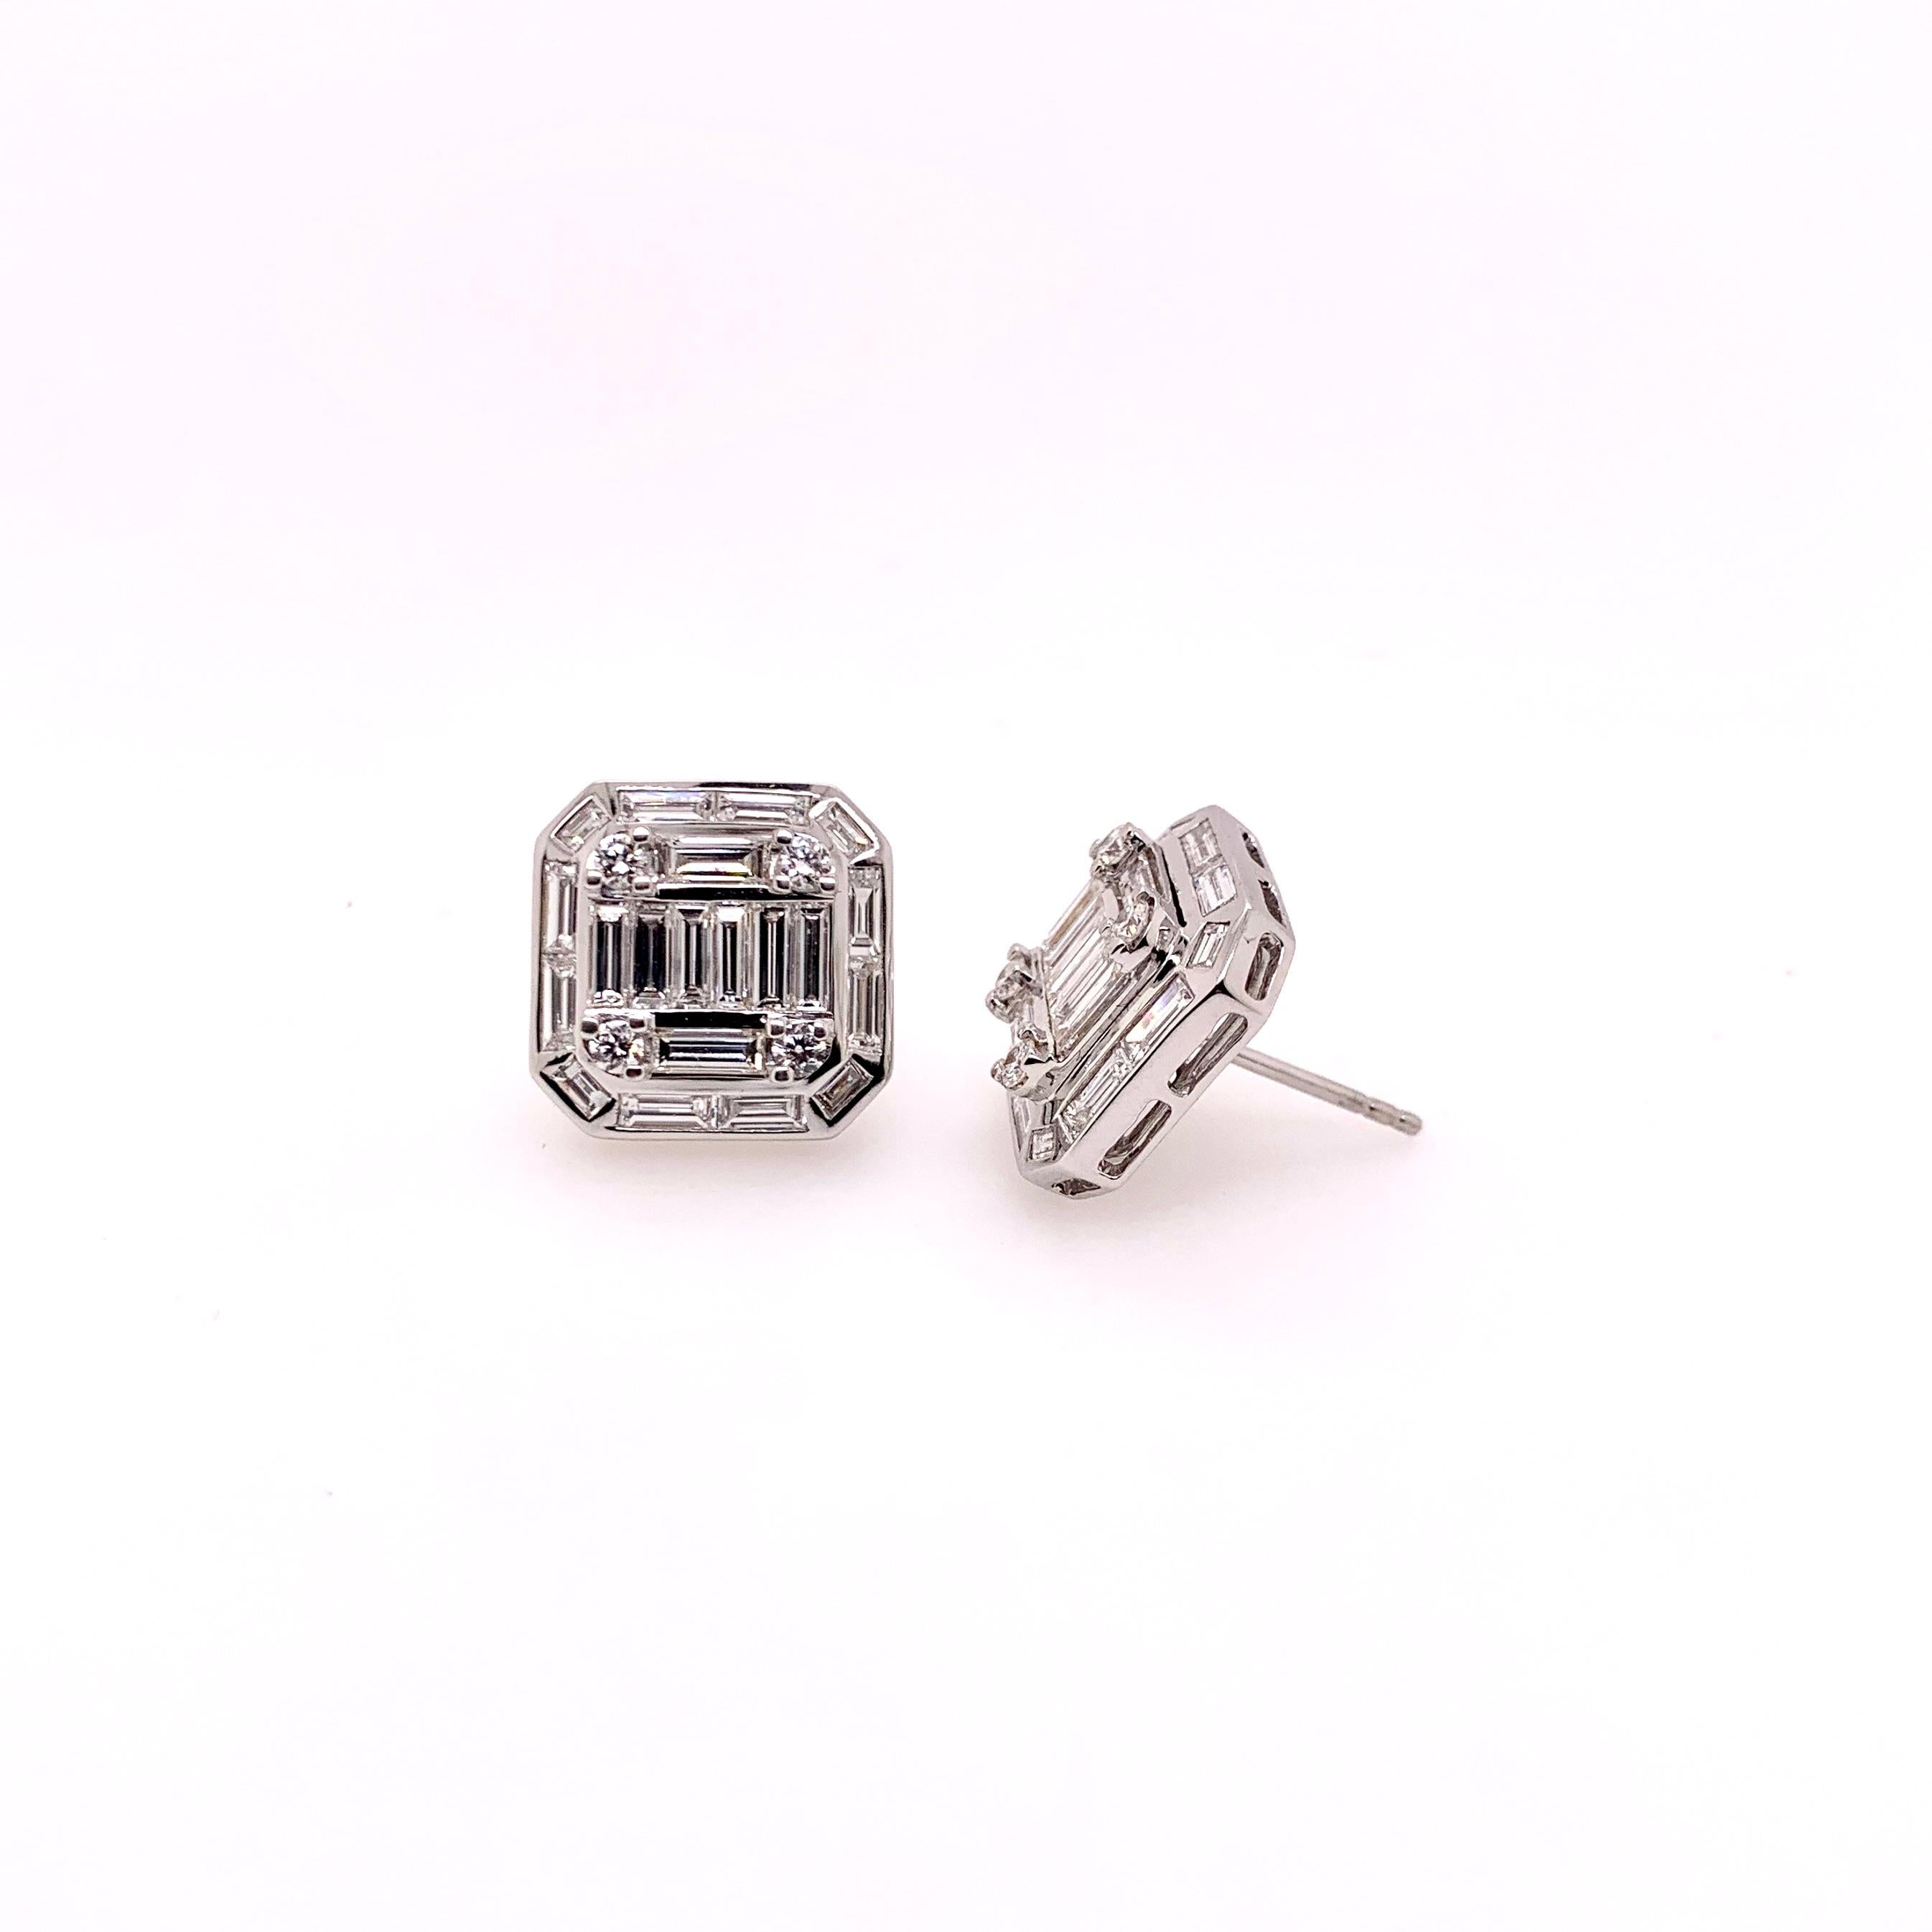 These baguette diamond earrings are absolutely breathtaking!  The workmanship involved using the 6 straight baguettes across the center displays the clean lines that is surrounded further by baguettes and round brilliant diamonds in this 18k white